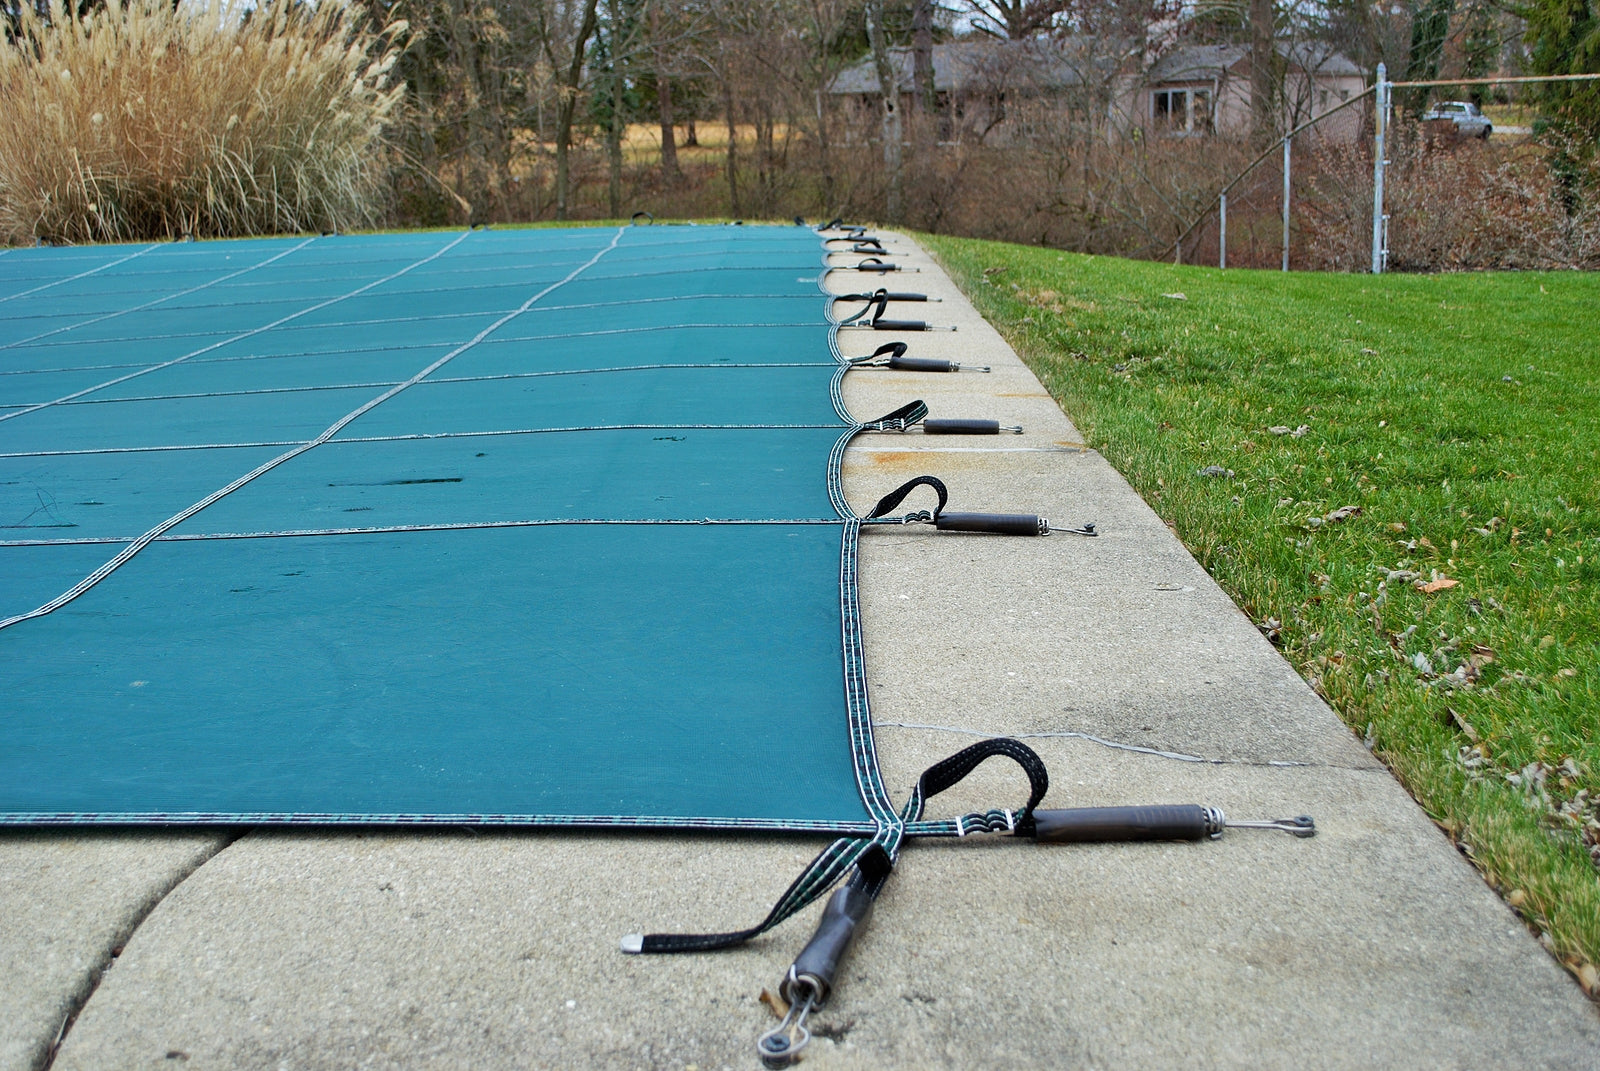 Mesh vs Solid Pool Cover - Pros, Cons, Comparisons and Costs